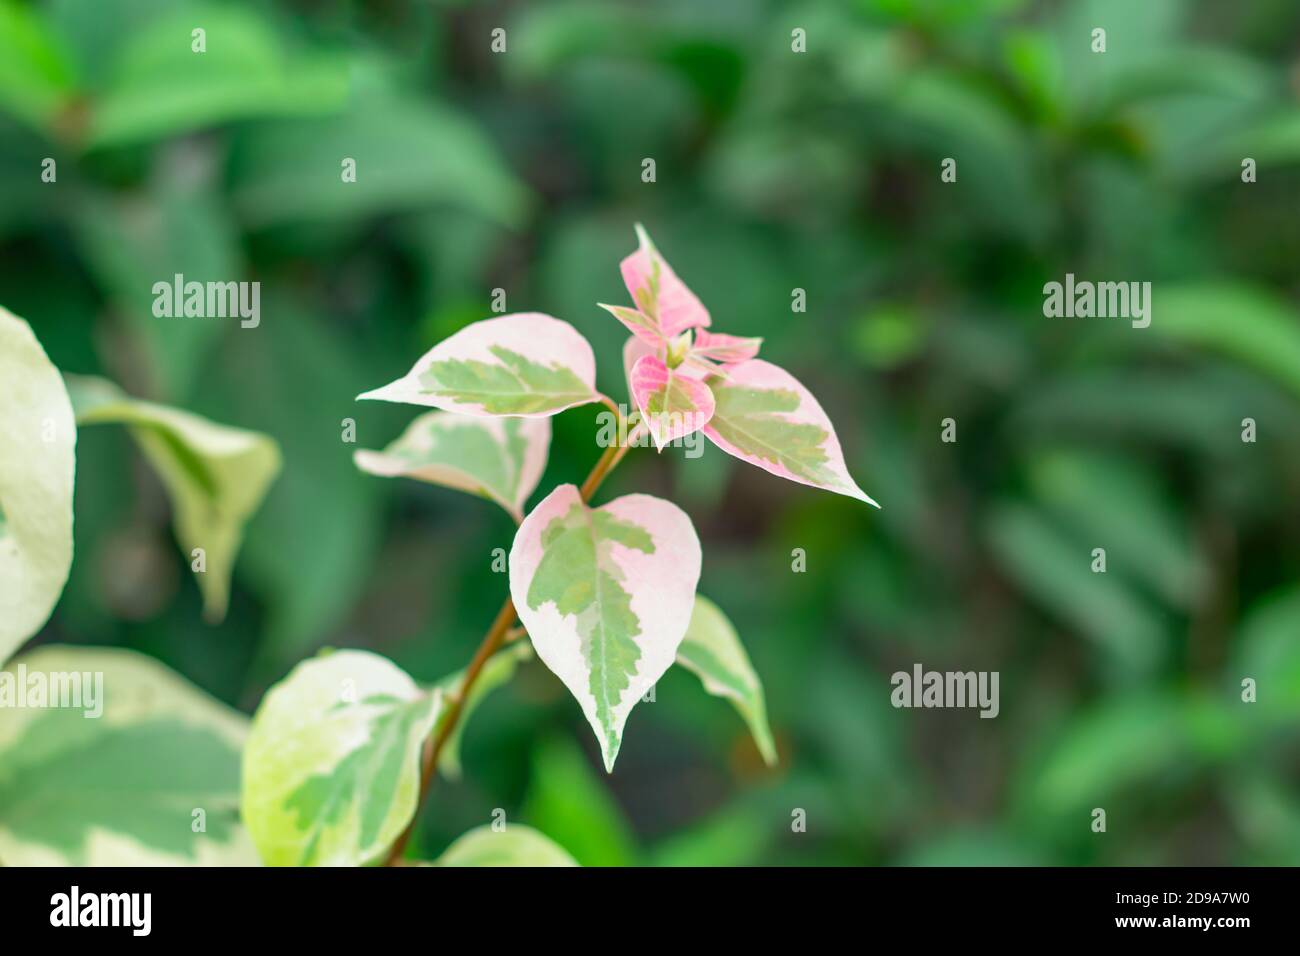 The very beautiful multi color leaf in the flower plant Stock Photo